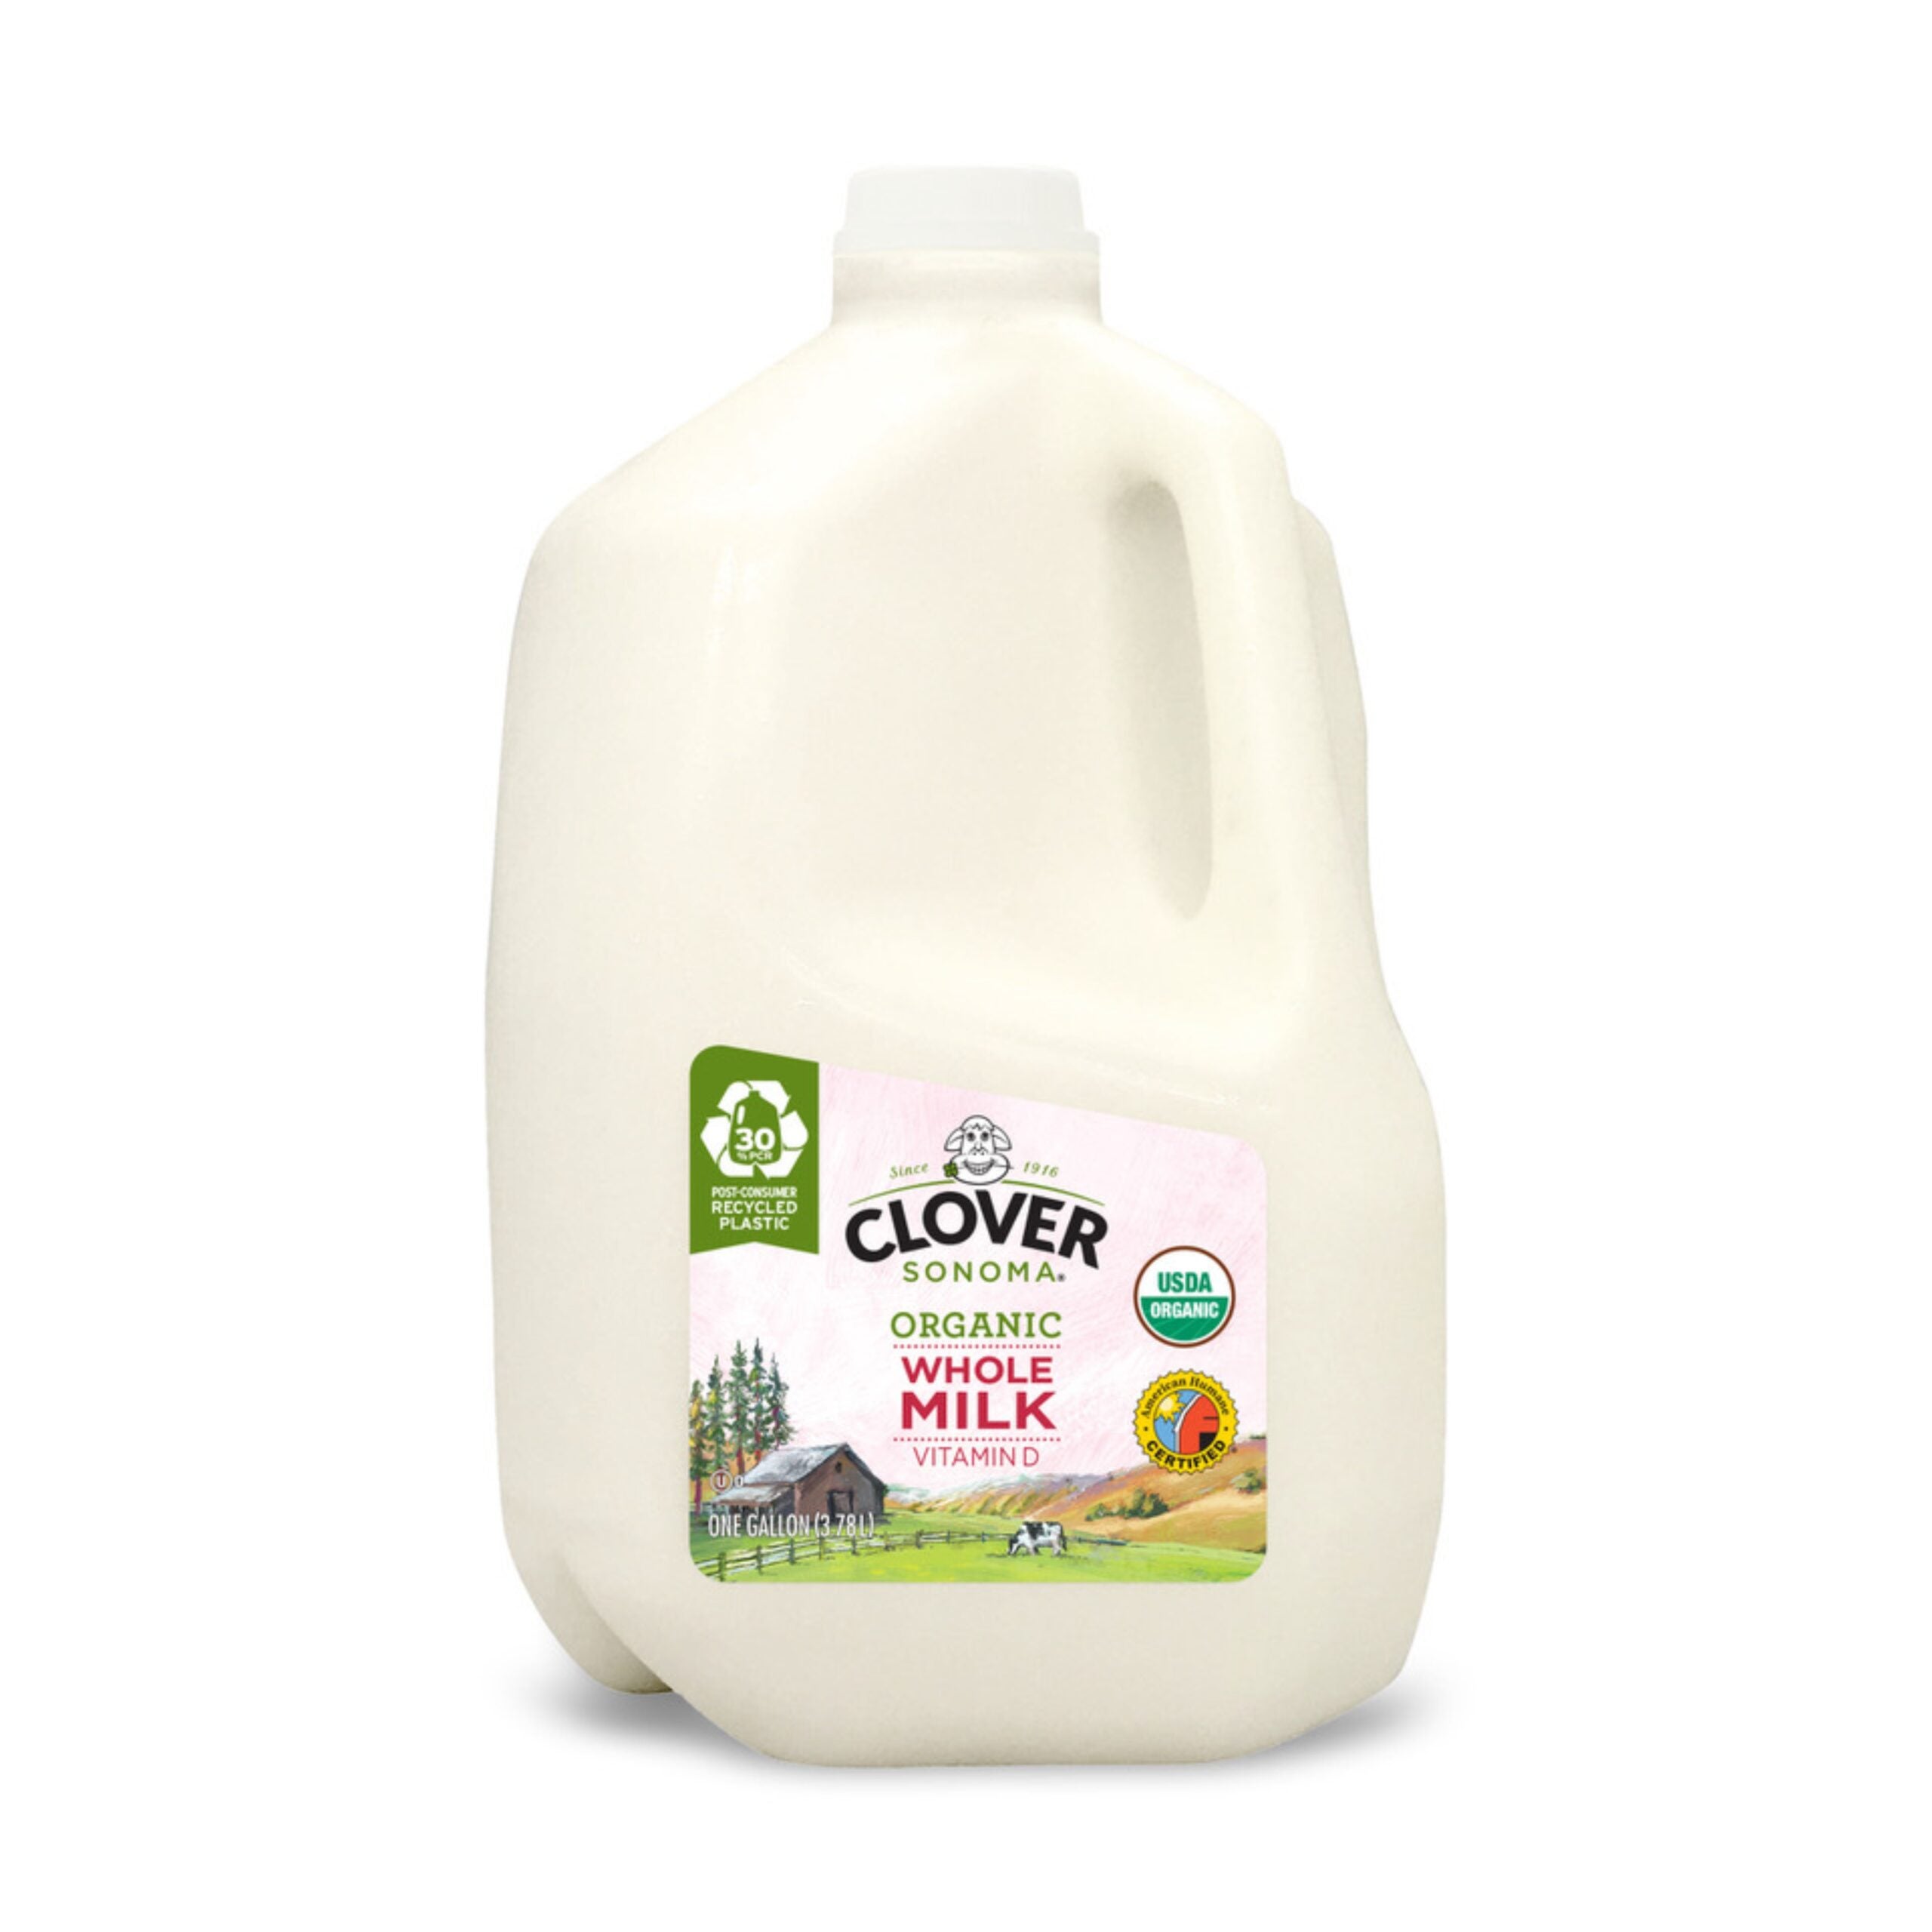 https://www.packaging-gateway.com/wp-content/uploads/sites/16/2021/09/Clover-Sonoma-1-scaled.jpg